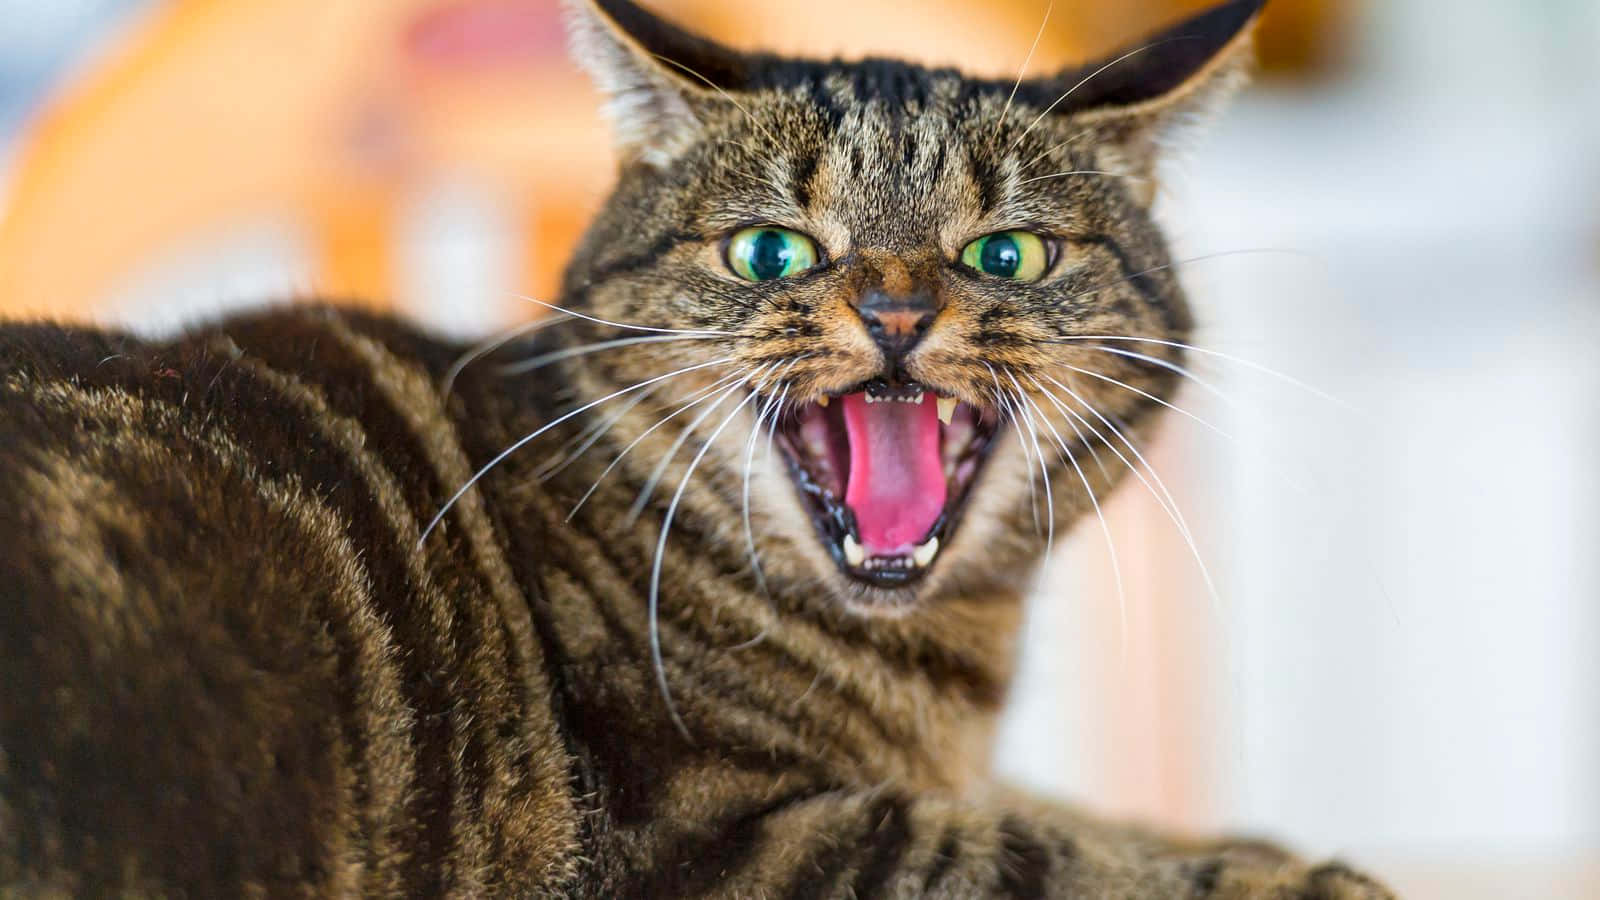  iPhone XS Max Cursed Cat Memes: Cursed Cat Angry As